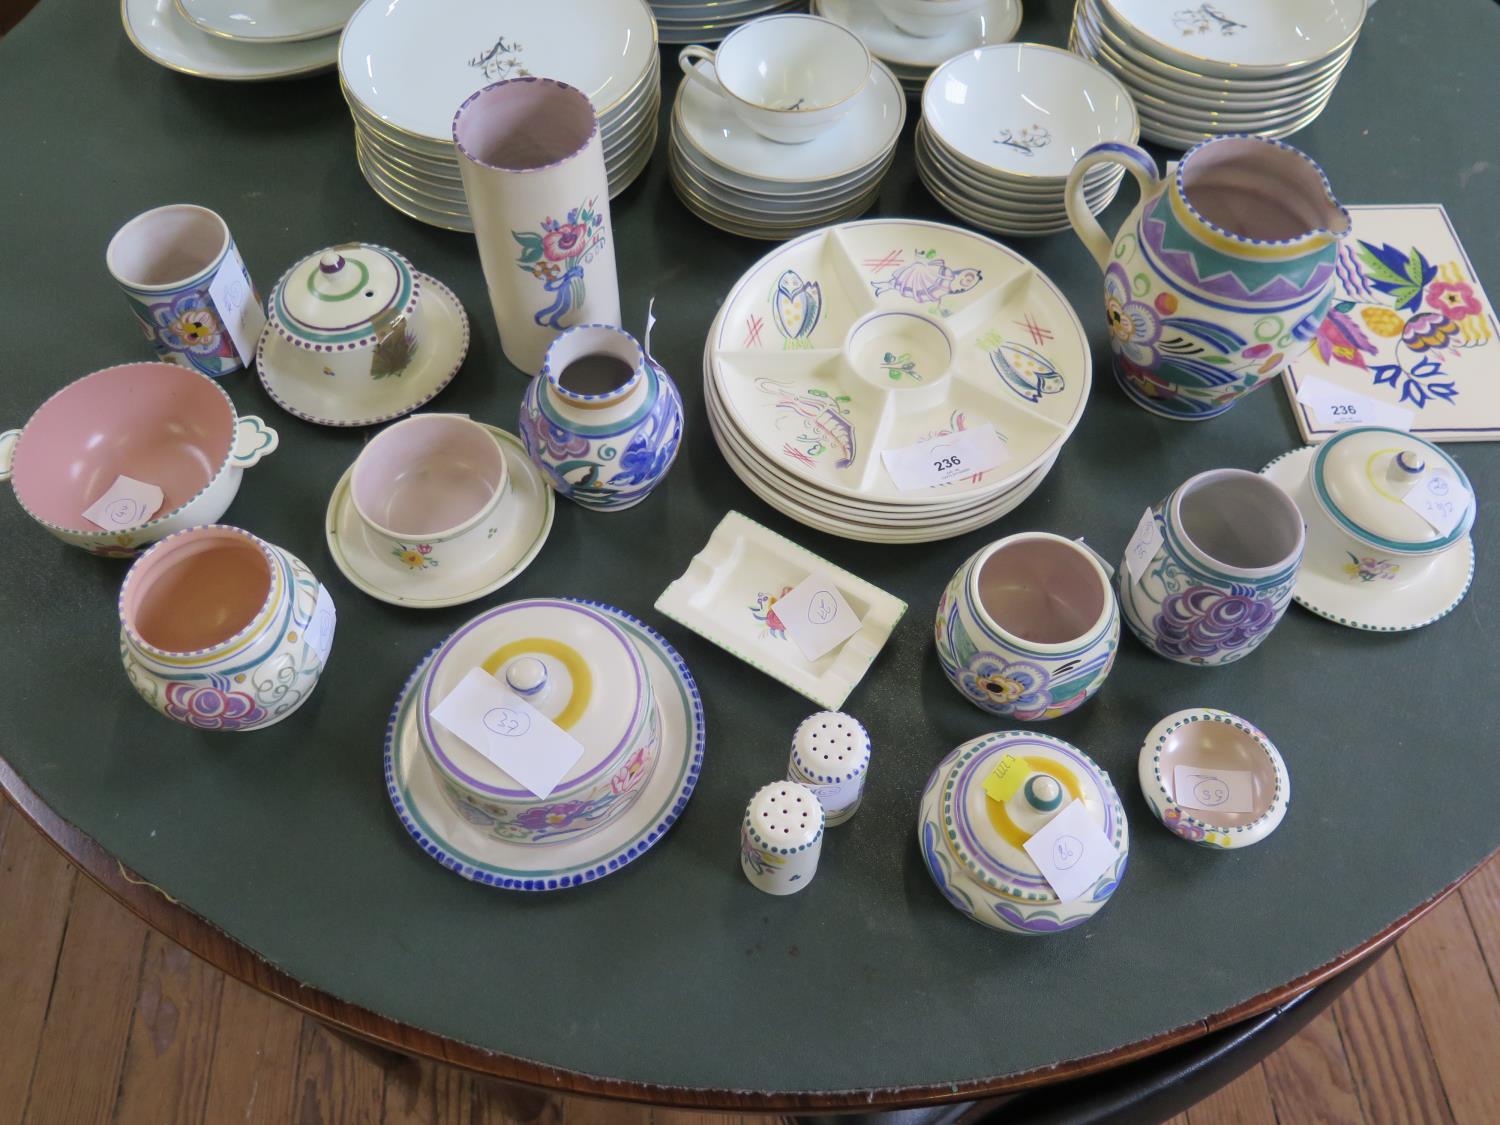 A collection of Poole Pottery, including a tile, plates, covered dishes, jars and an ashtray, all